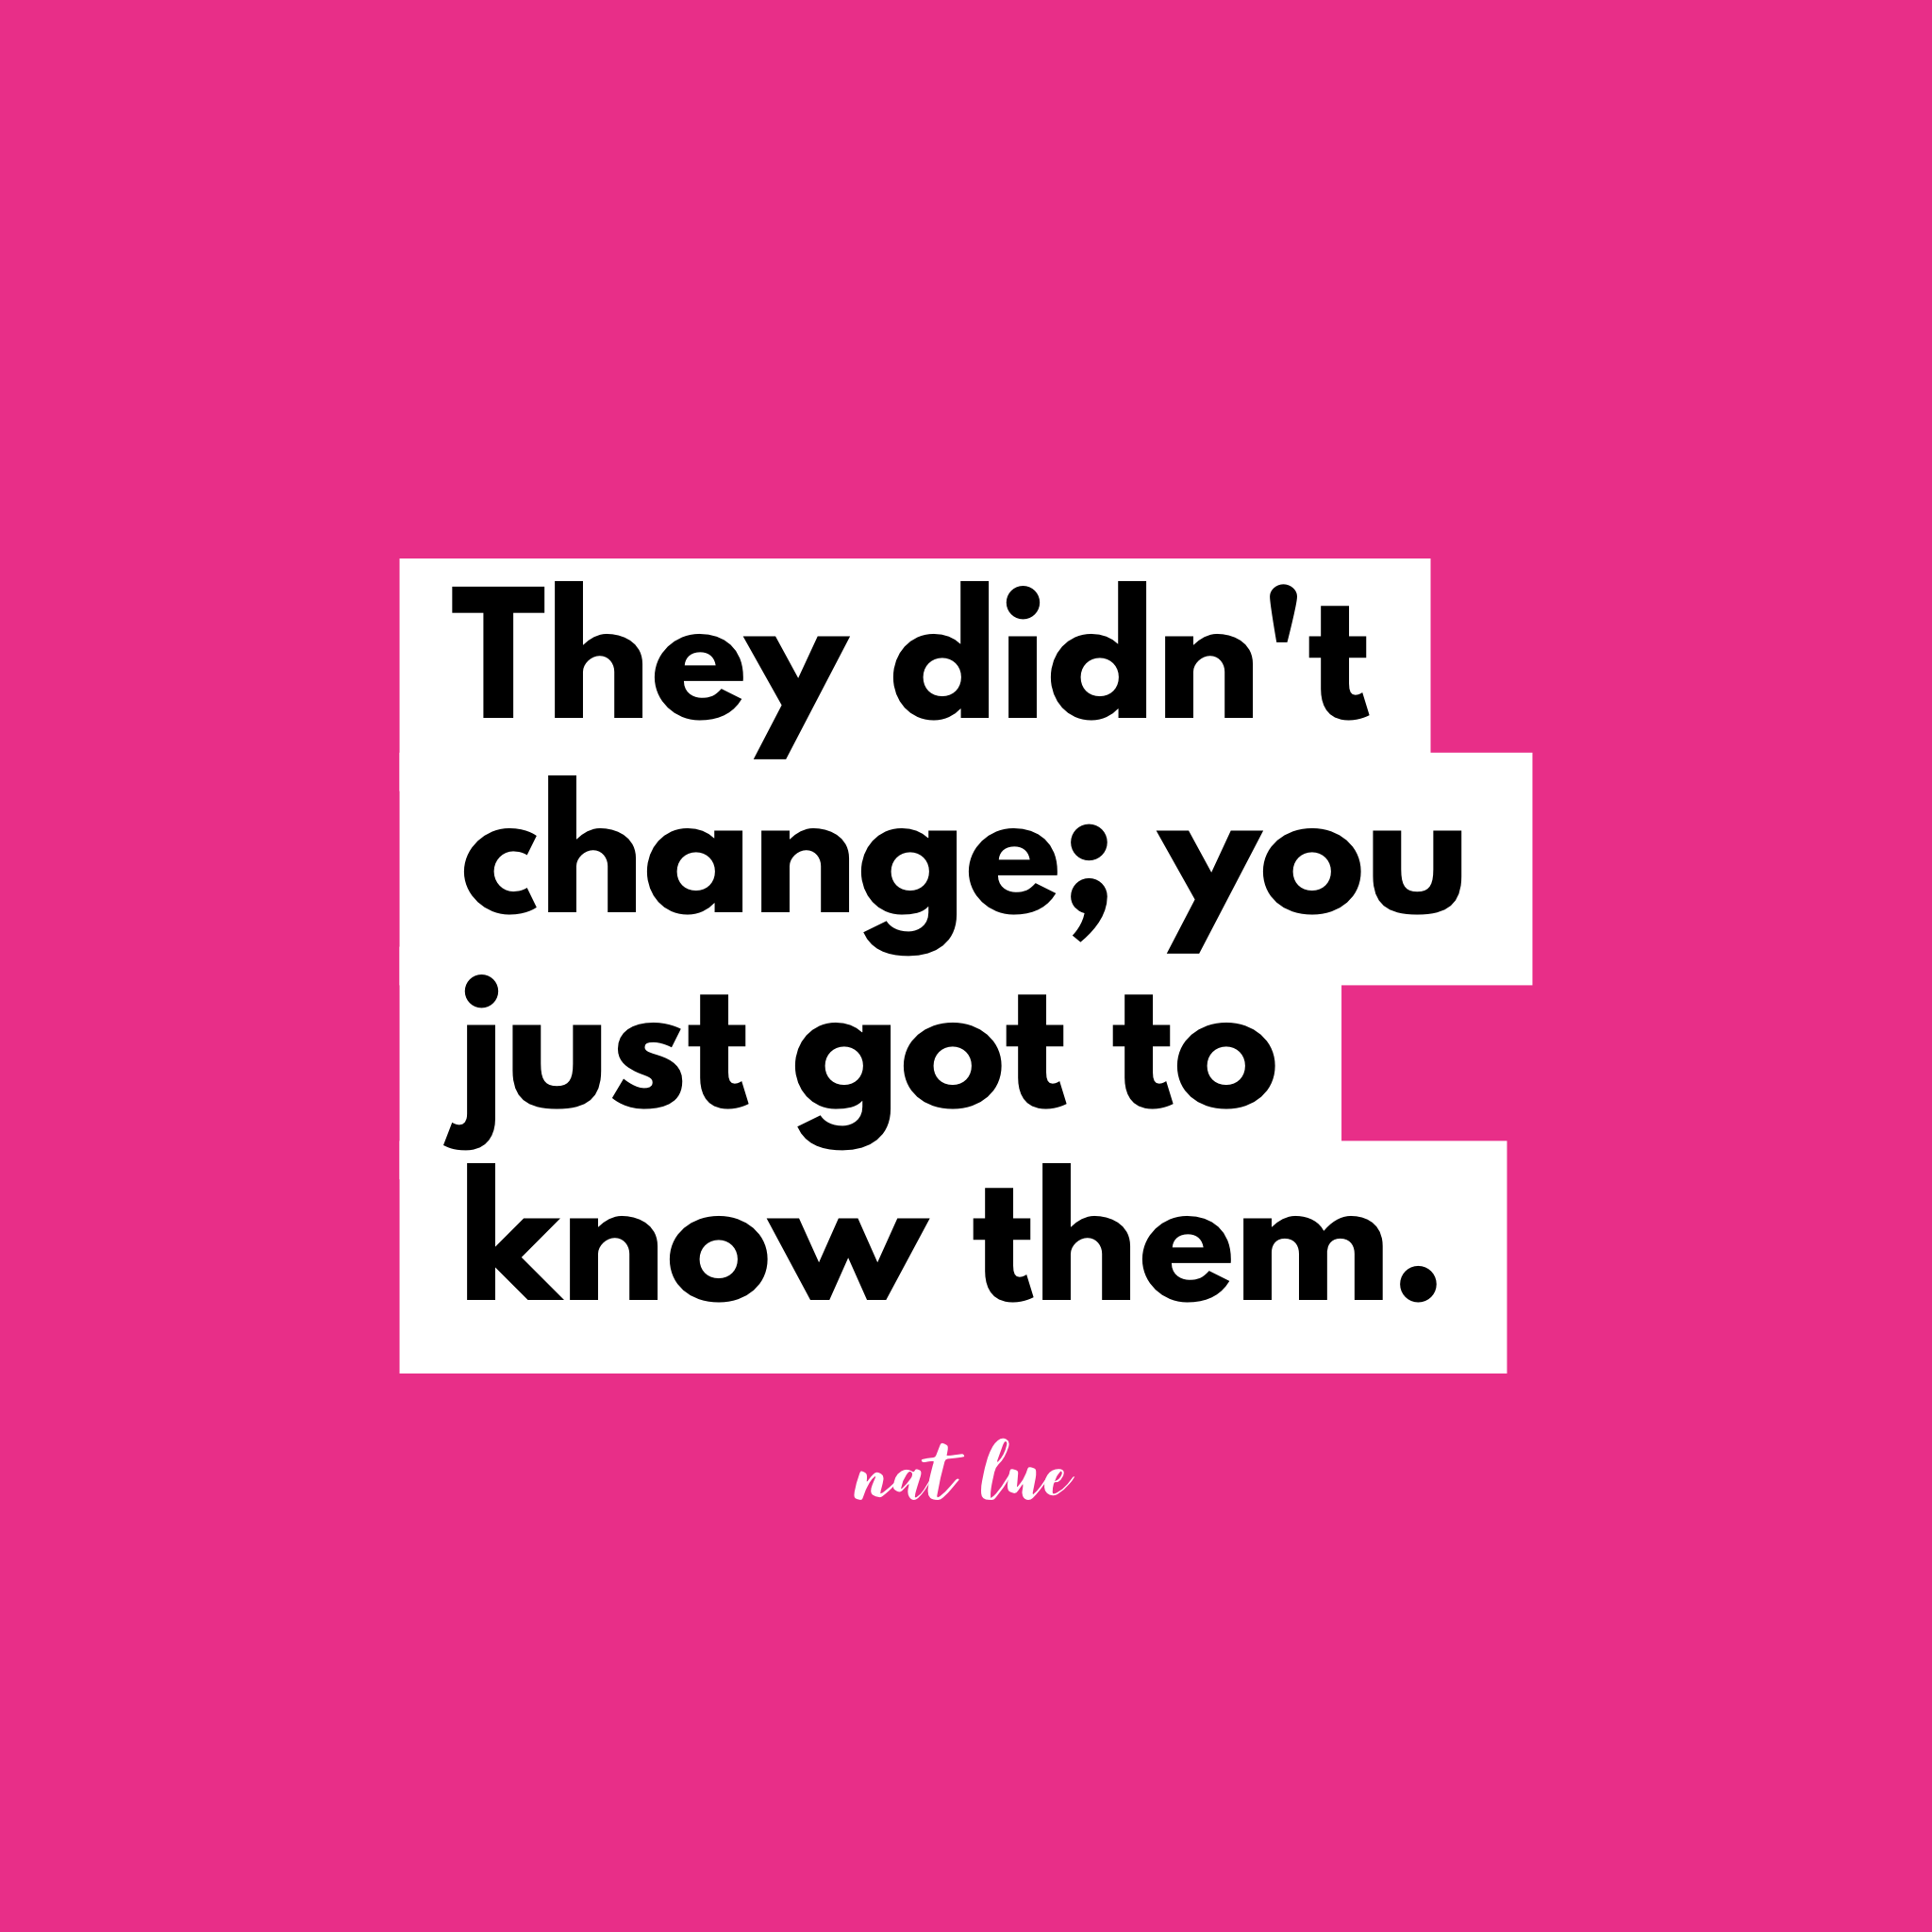 They didn't change, you just got to know them. by Natalie Lue